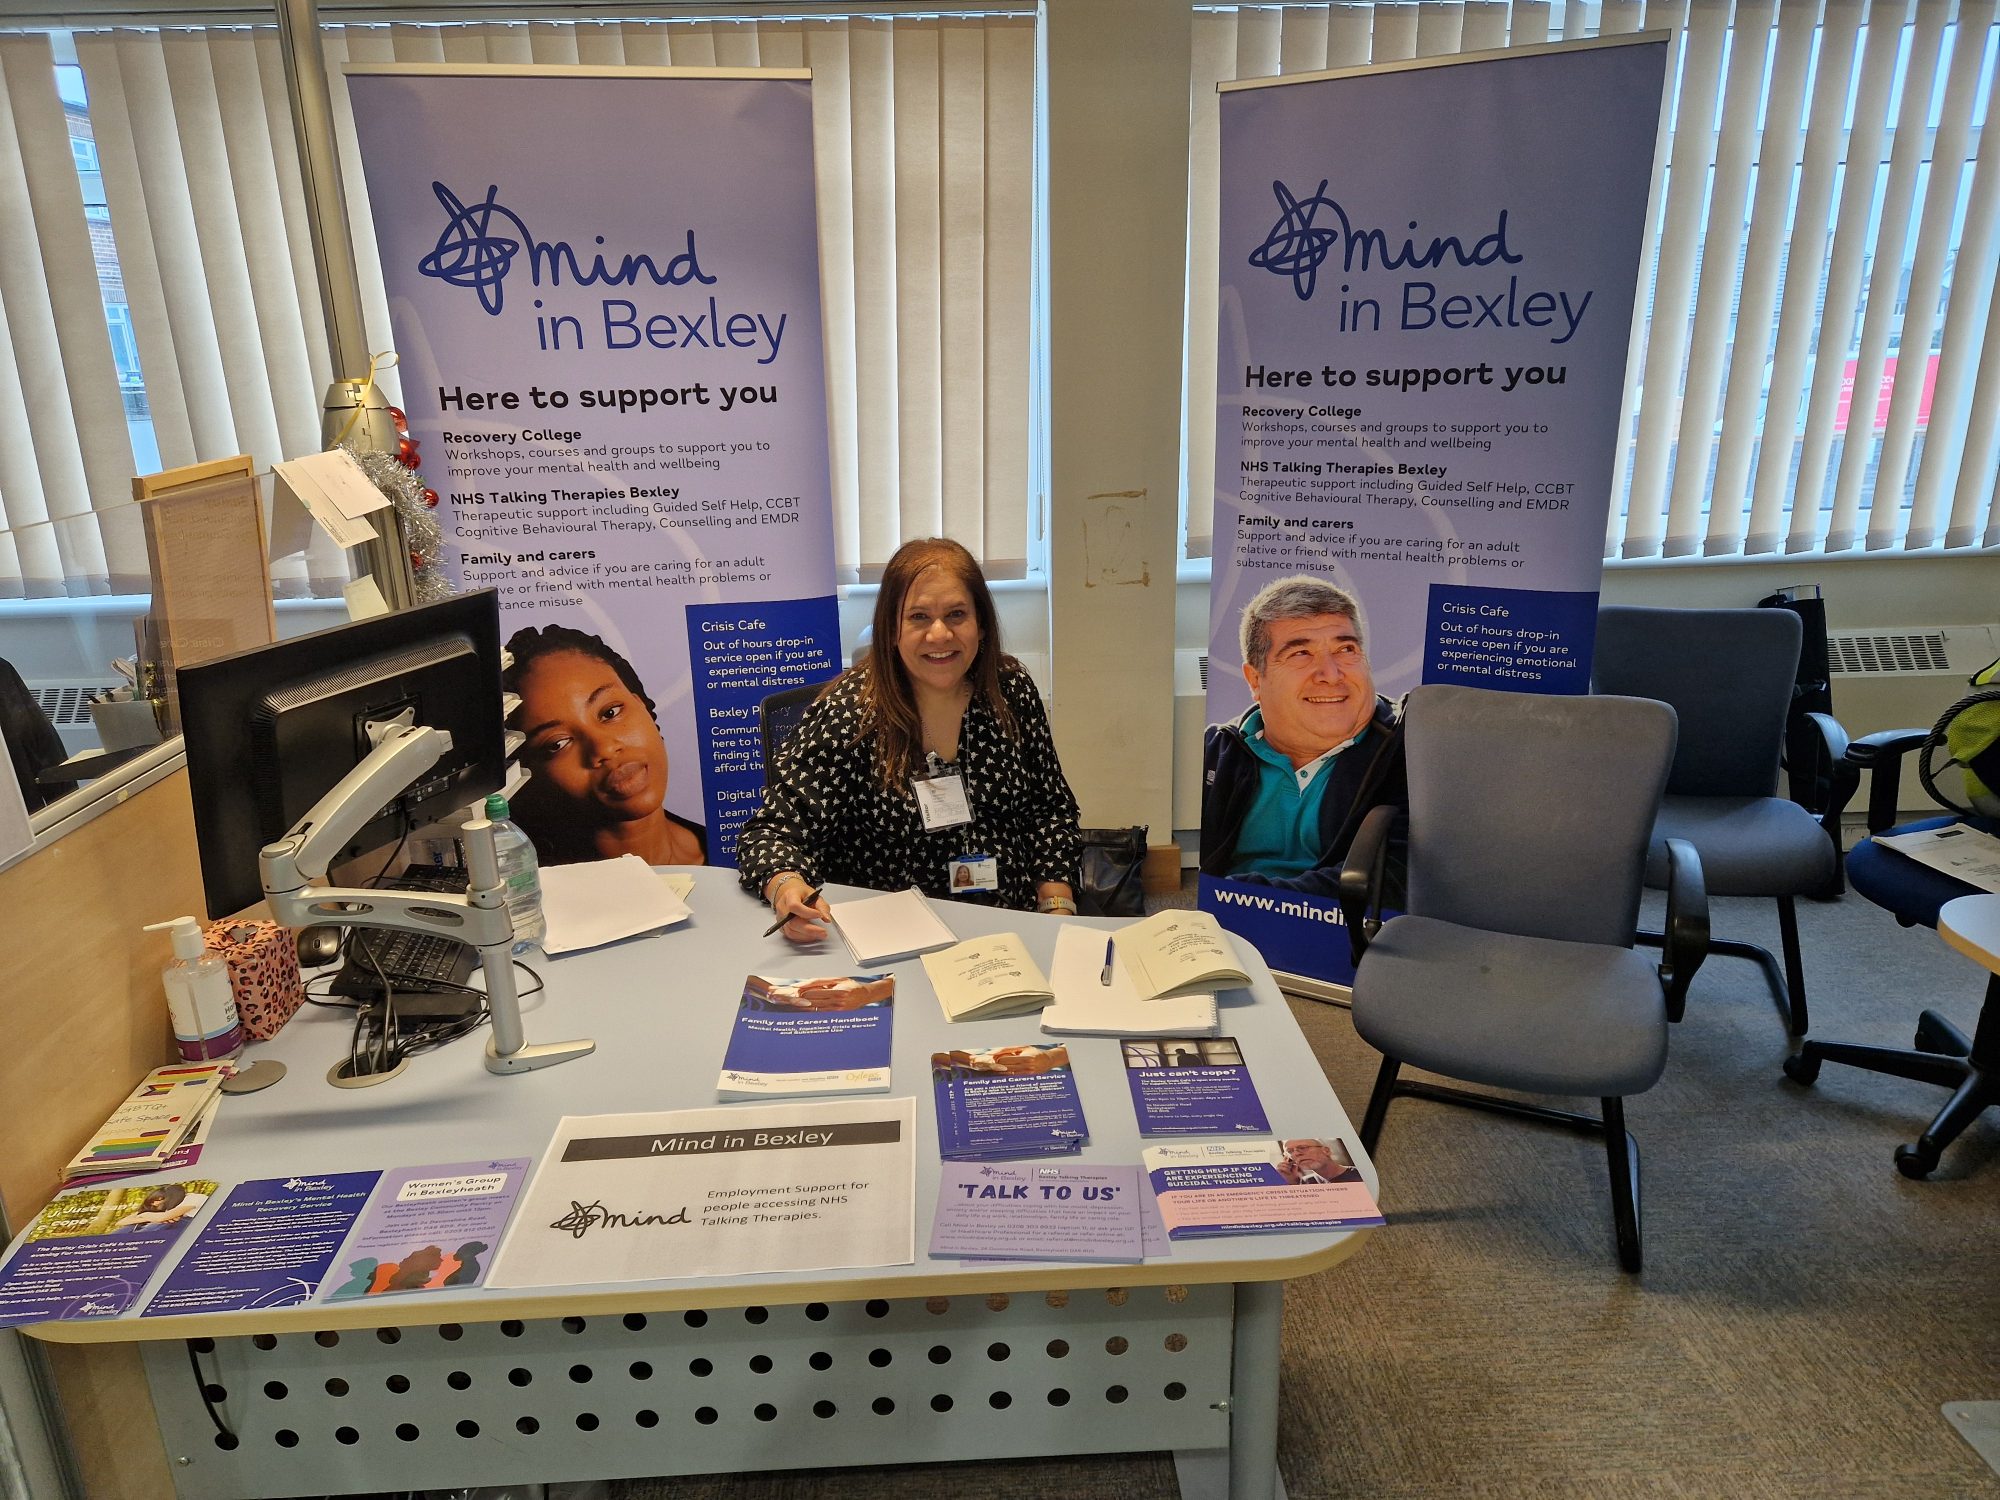 Swarn Brar attending the Bexleyheath Job Fair sat at a desh with promotional banners behind and materials on the desk